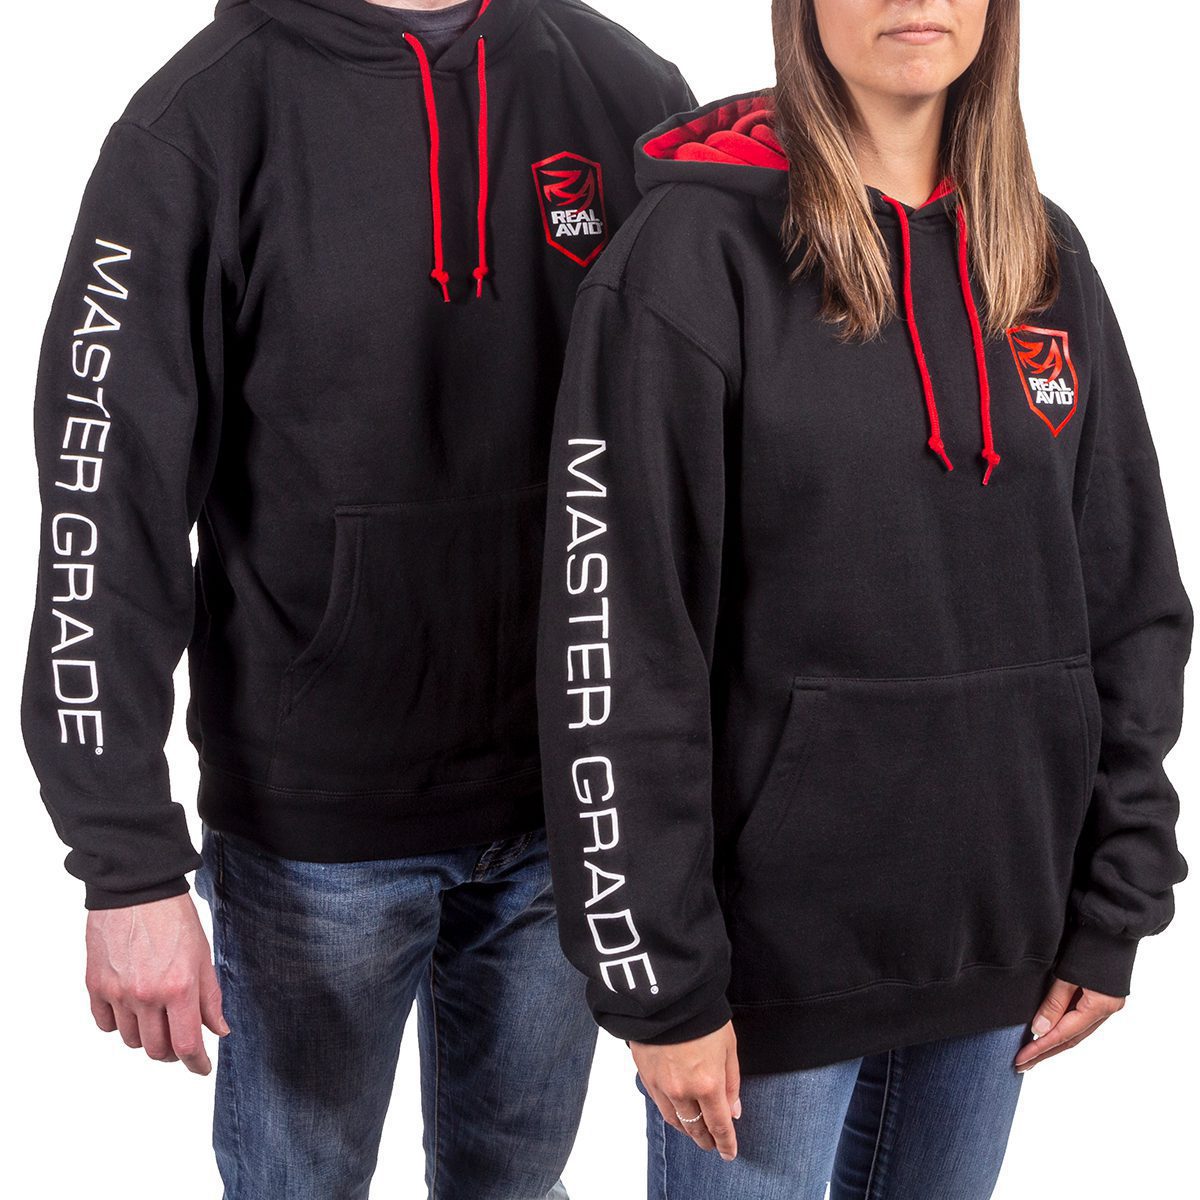 a man and woman wearing black hoodies with white lettering